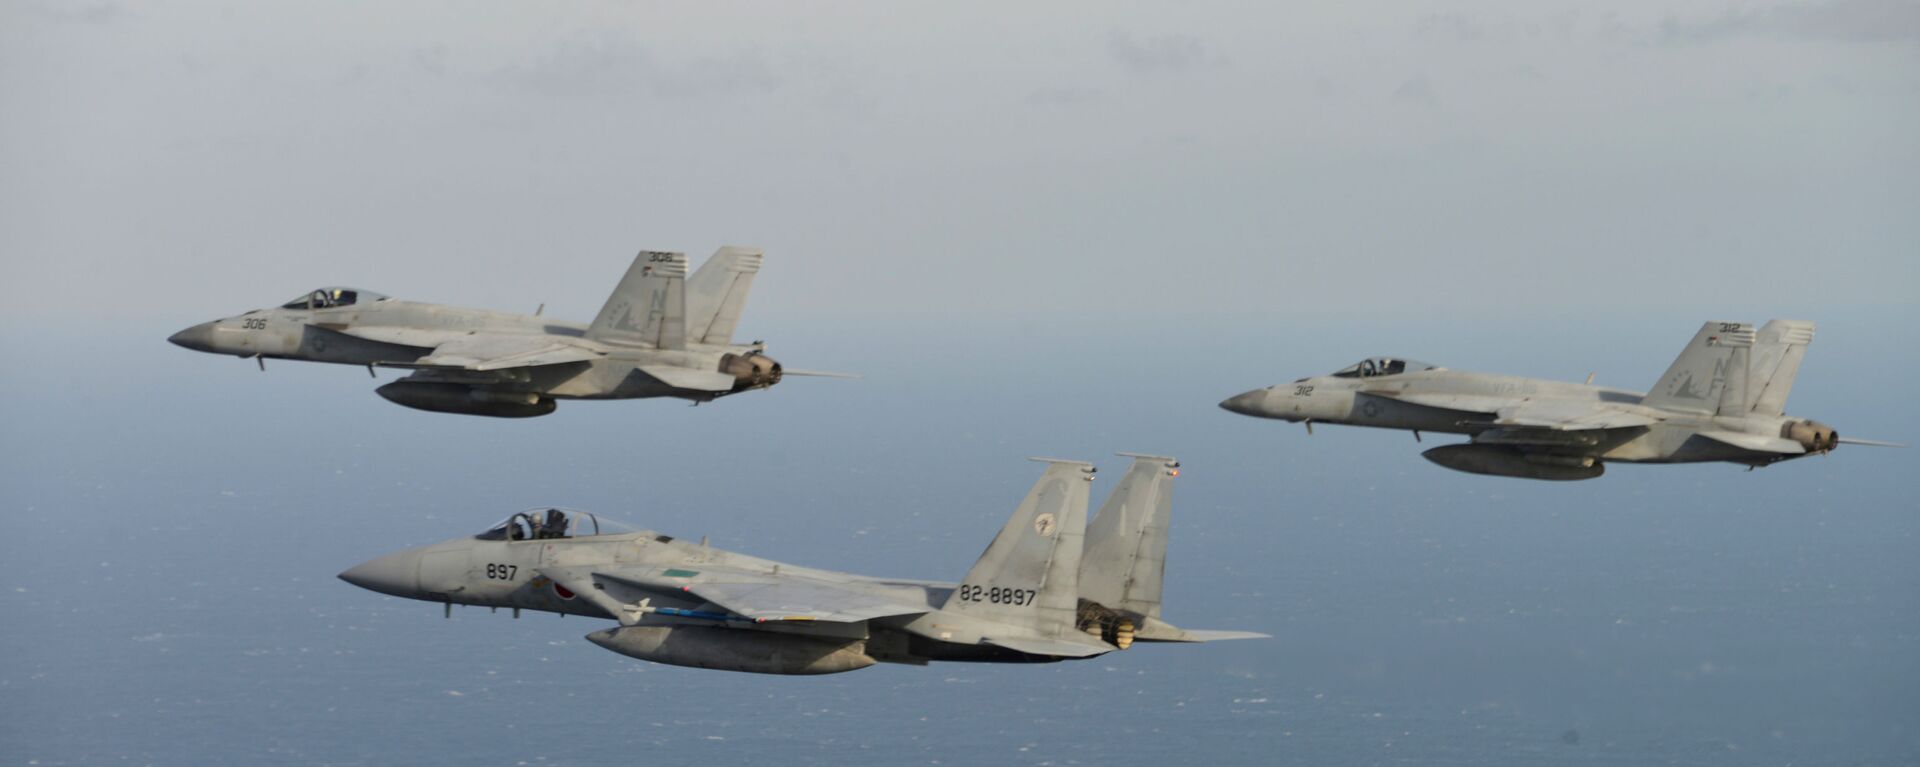 In this Nov. 10, 2017 photo provided by Japan Air Self-Defense Force, two of U.S. F/A-18, left, and right, and Japan Air Self-Defense Force's F-15 fly during a joint military exercise at an undisclosed location.  (Japan Air Self-Defense Force via AP) - Sputnik International, 1920, 20.06.2021